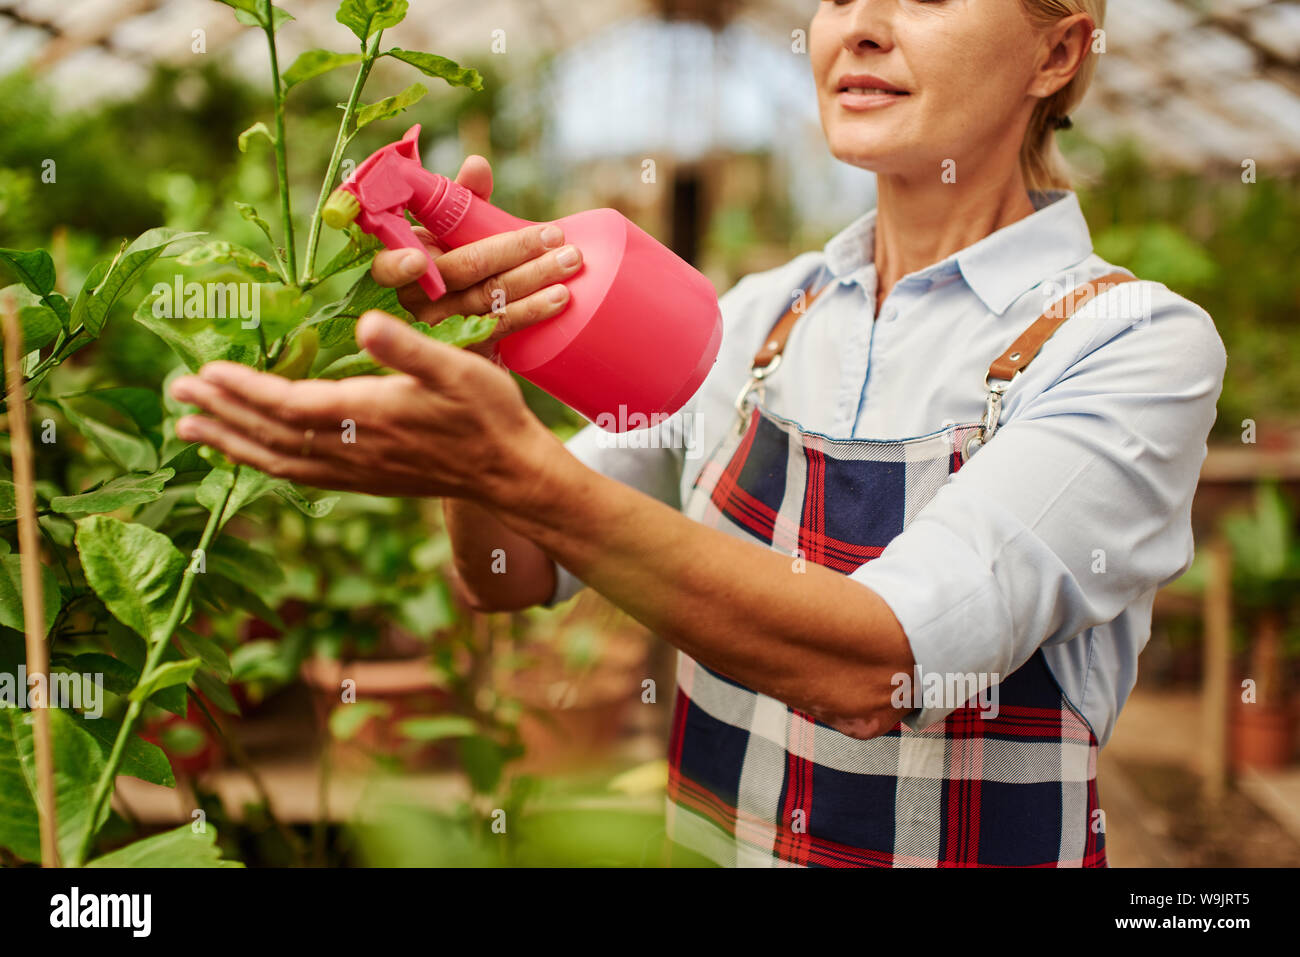 Farmer in apron sprays flower's leaves with water in the greenhouse. Stock Photo